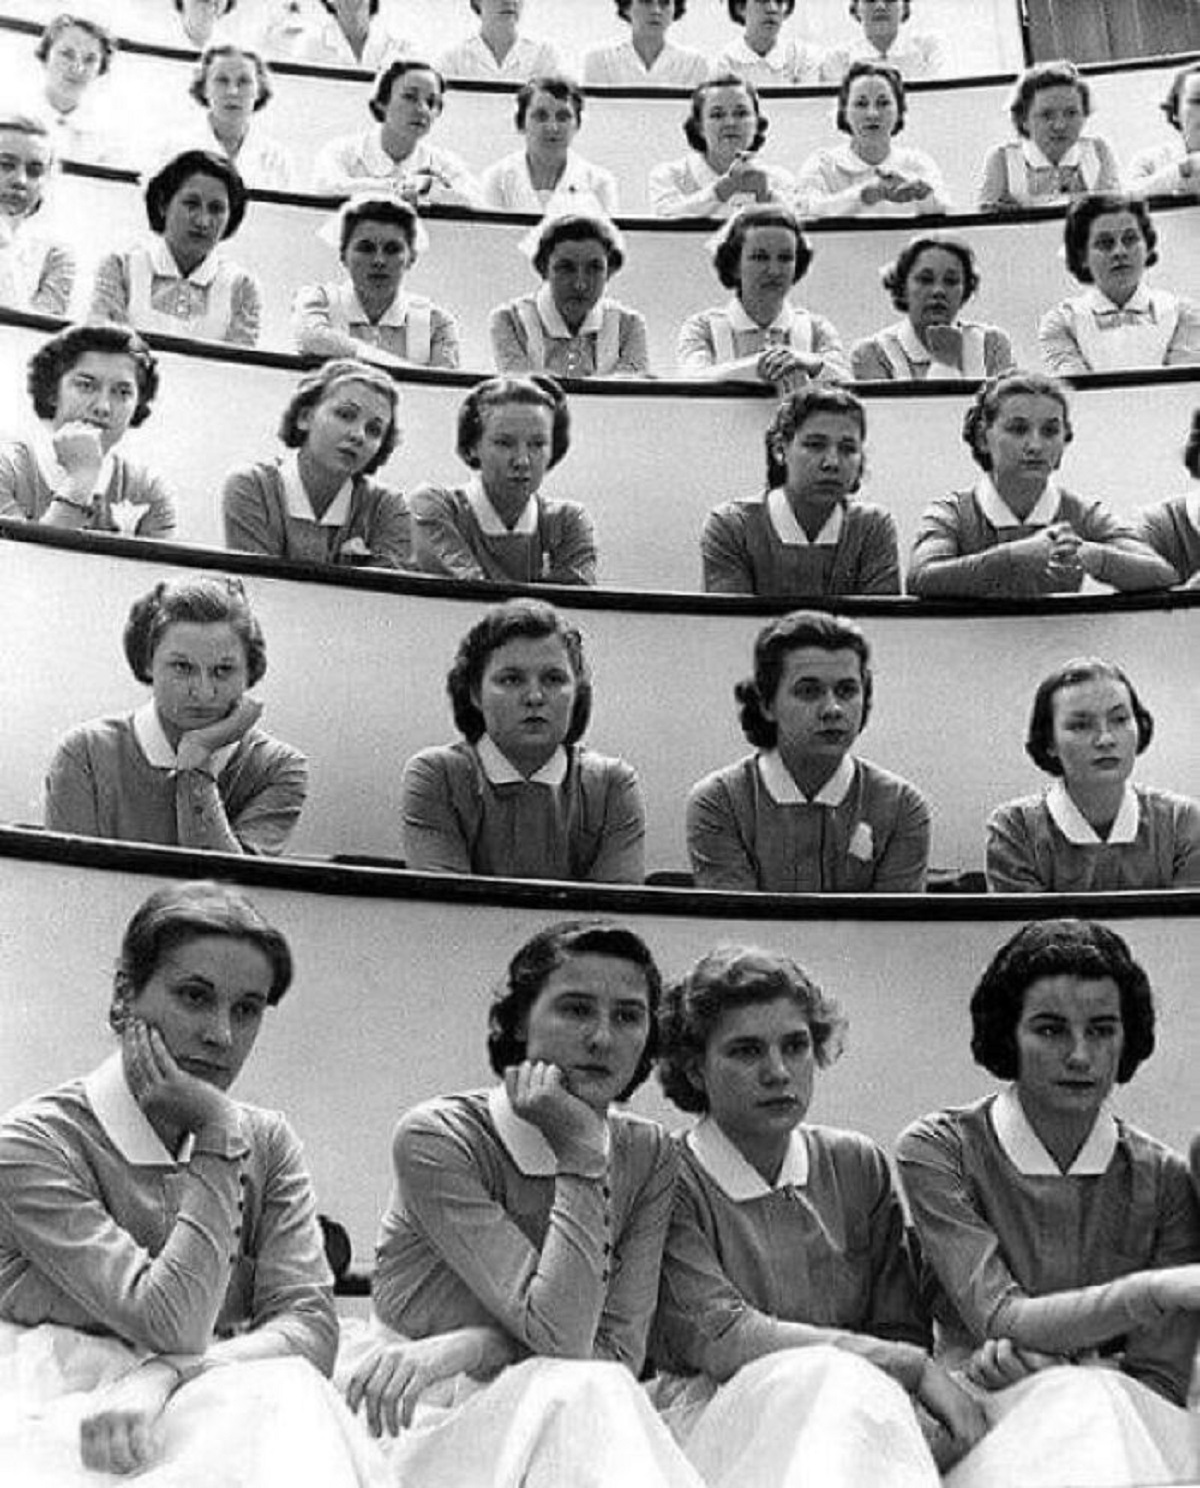 By Alfred Eisenstaedt. Student Nurses Getting Lessons, Roosevelt Hospital NY, 1938